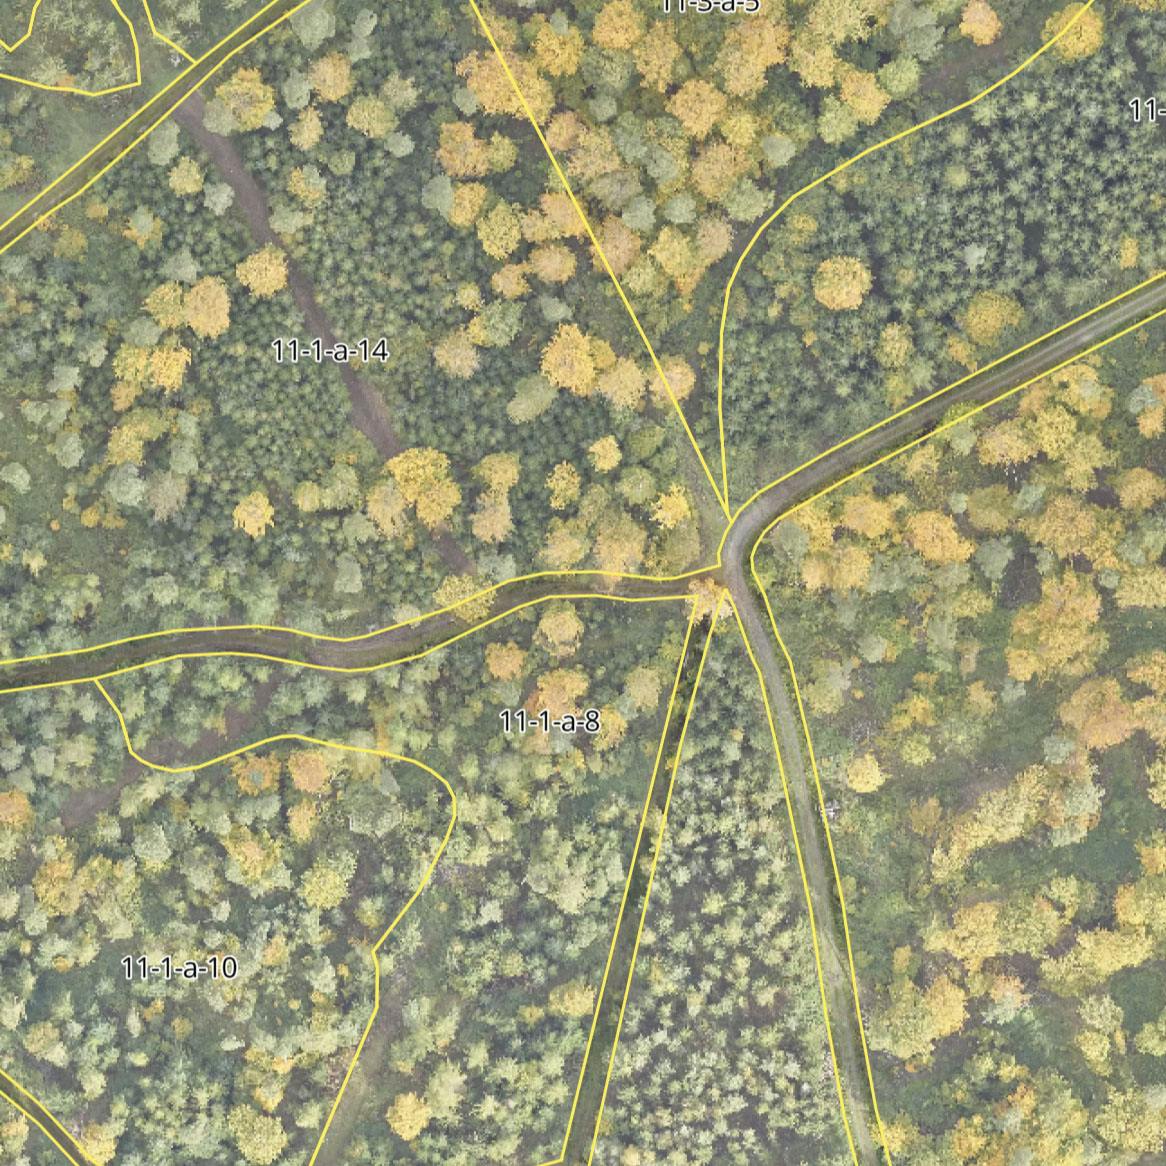 Aerial image of a forest displaying the different parts and back roads digitally in yellow 